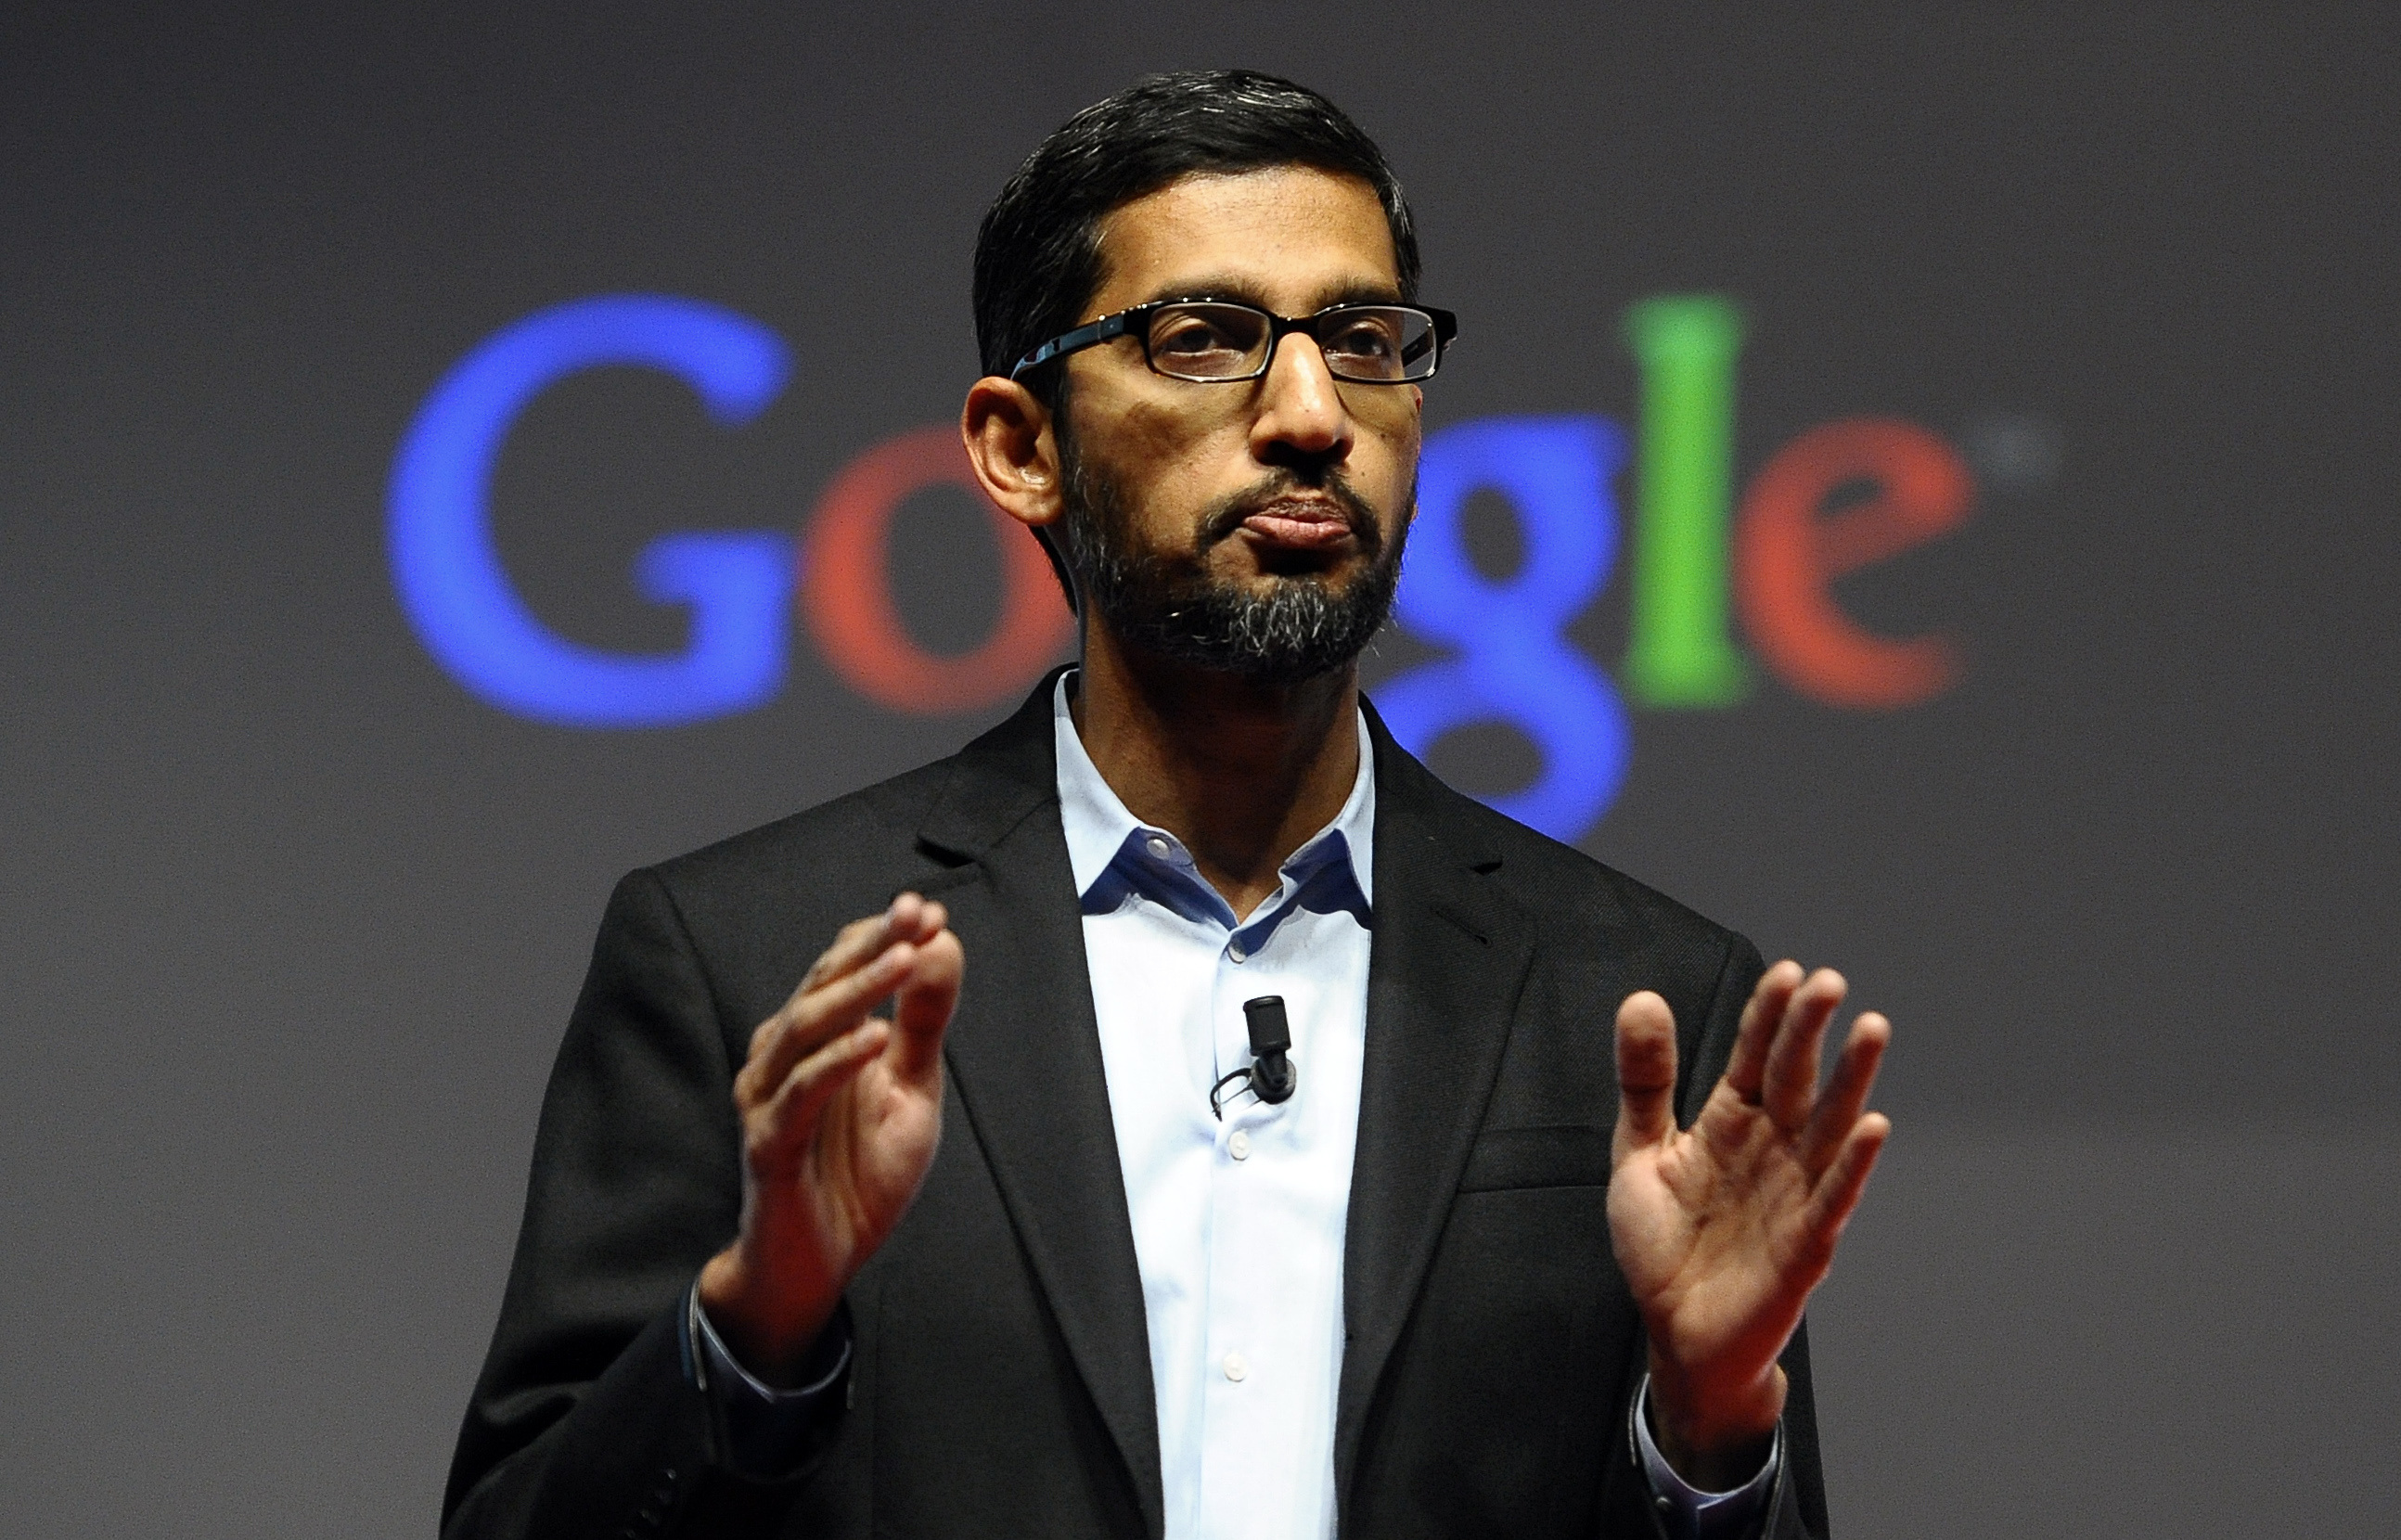 Google CEO Sundar Pichai has been selected to receive the prestigious Great Immigrant Award for 2016.